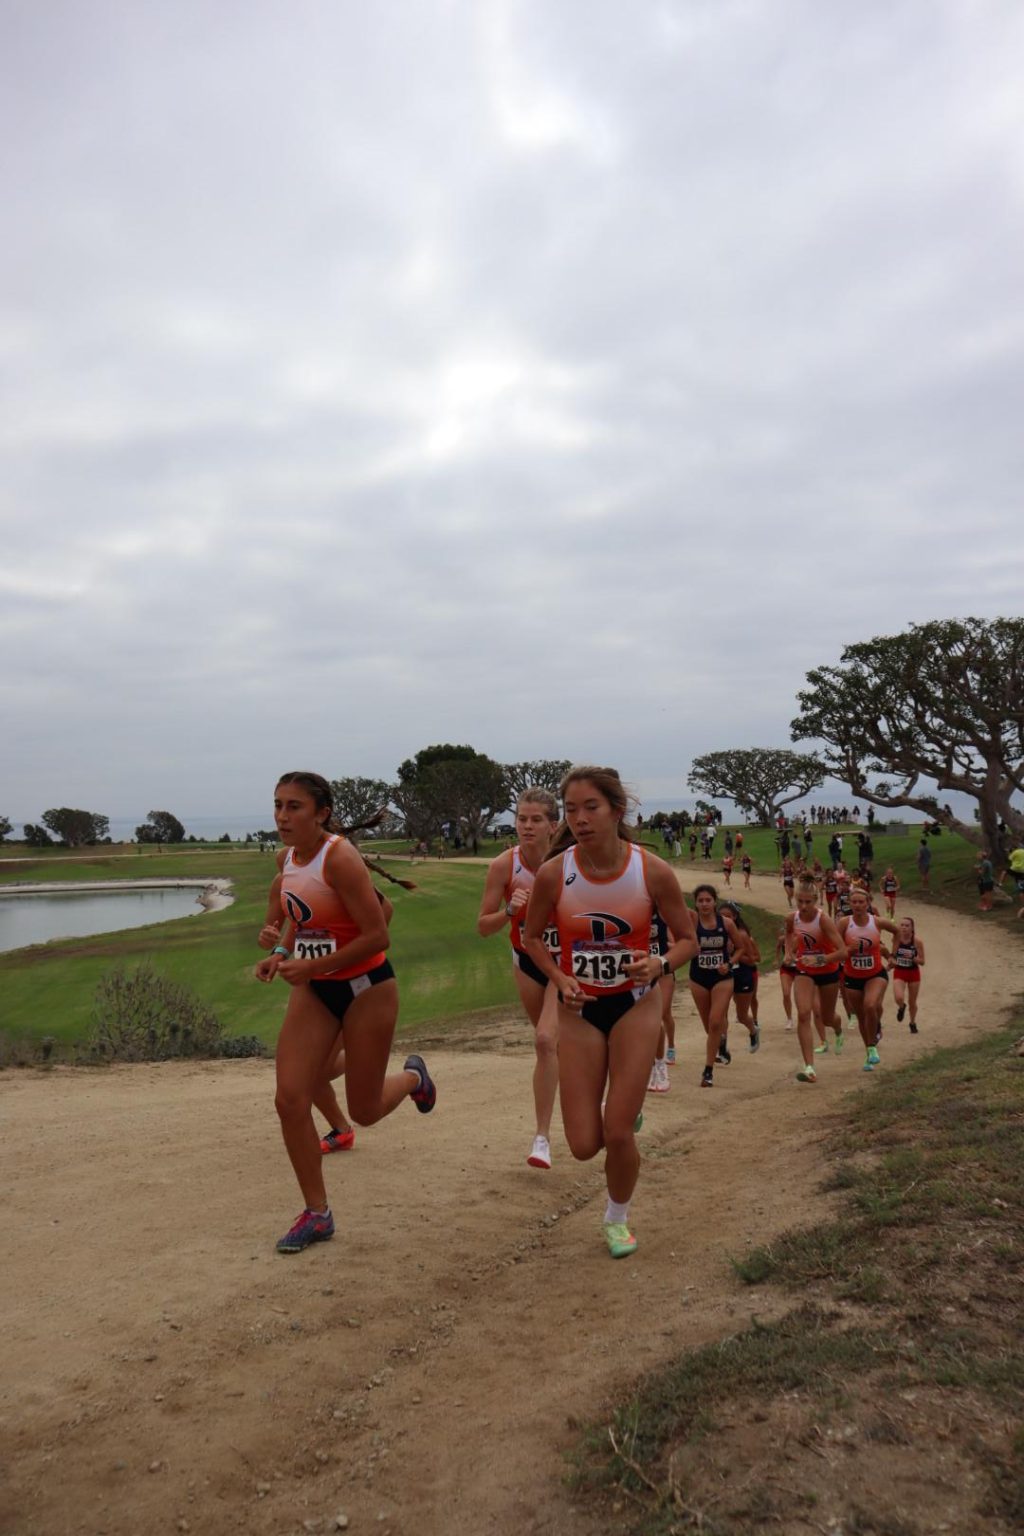 Runners from the six schools compete in the Waves Invitational. The women's team finished with a score of 47 points.